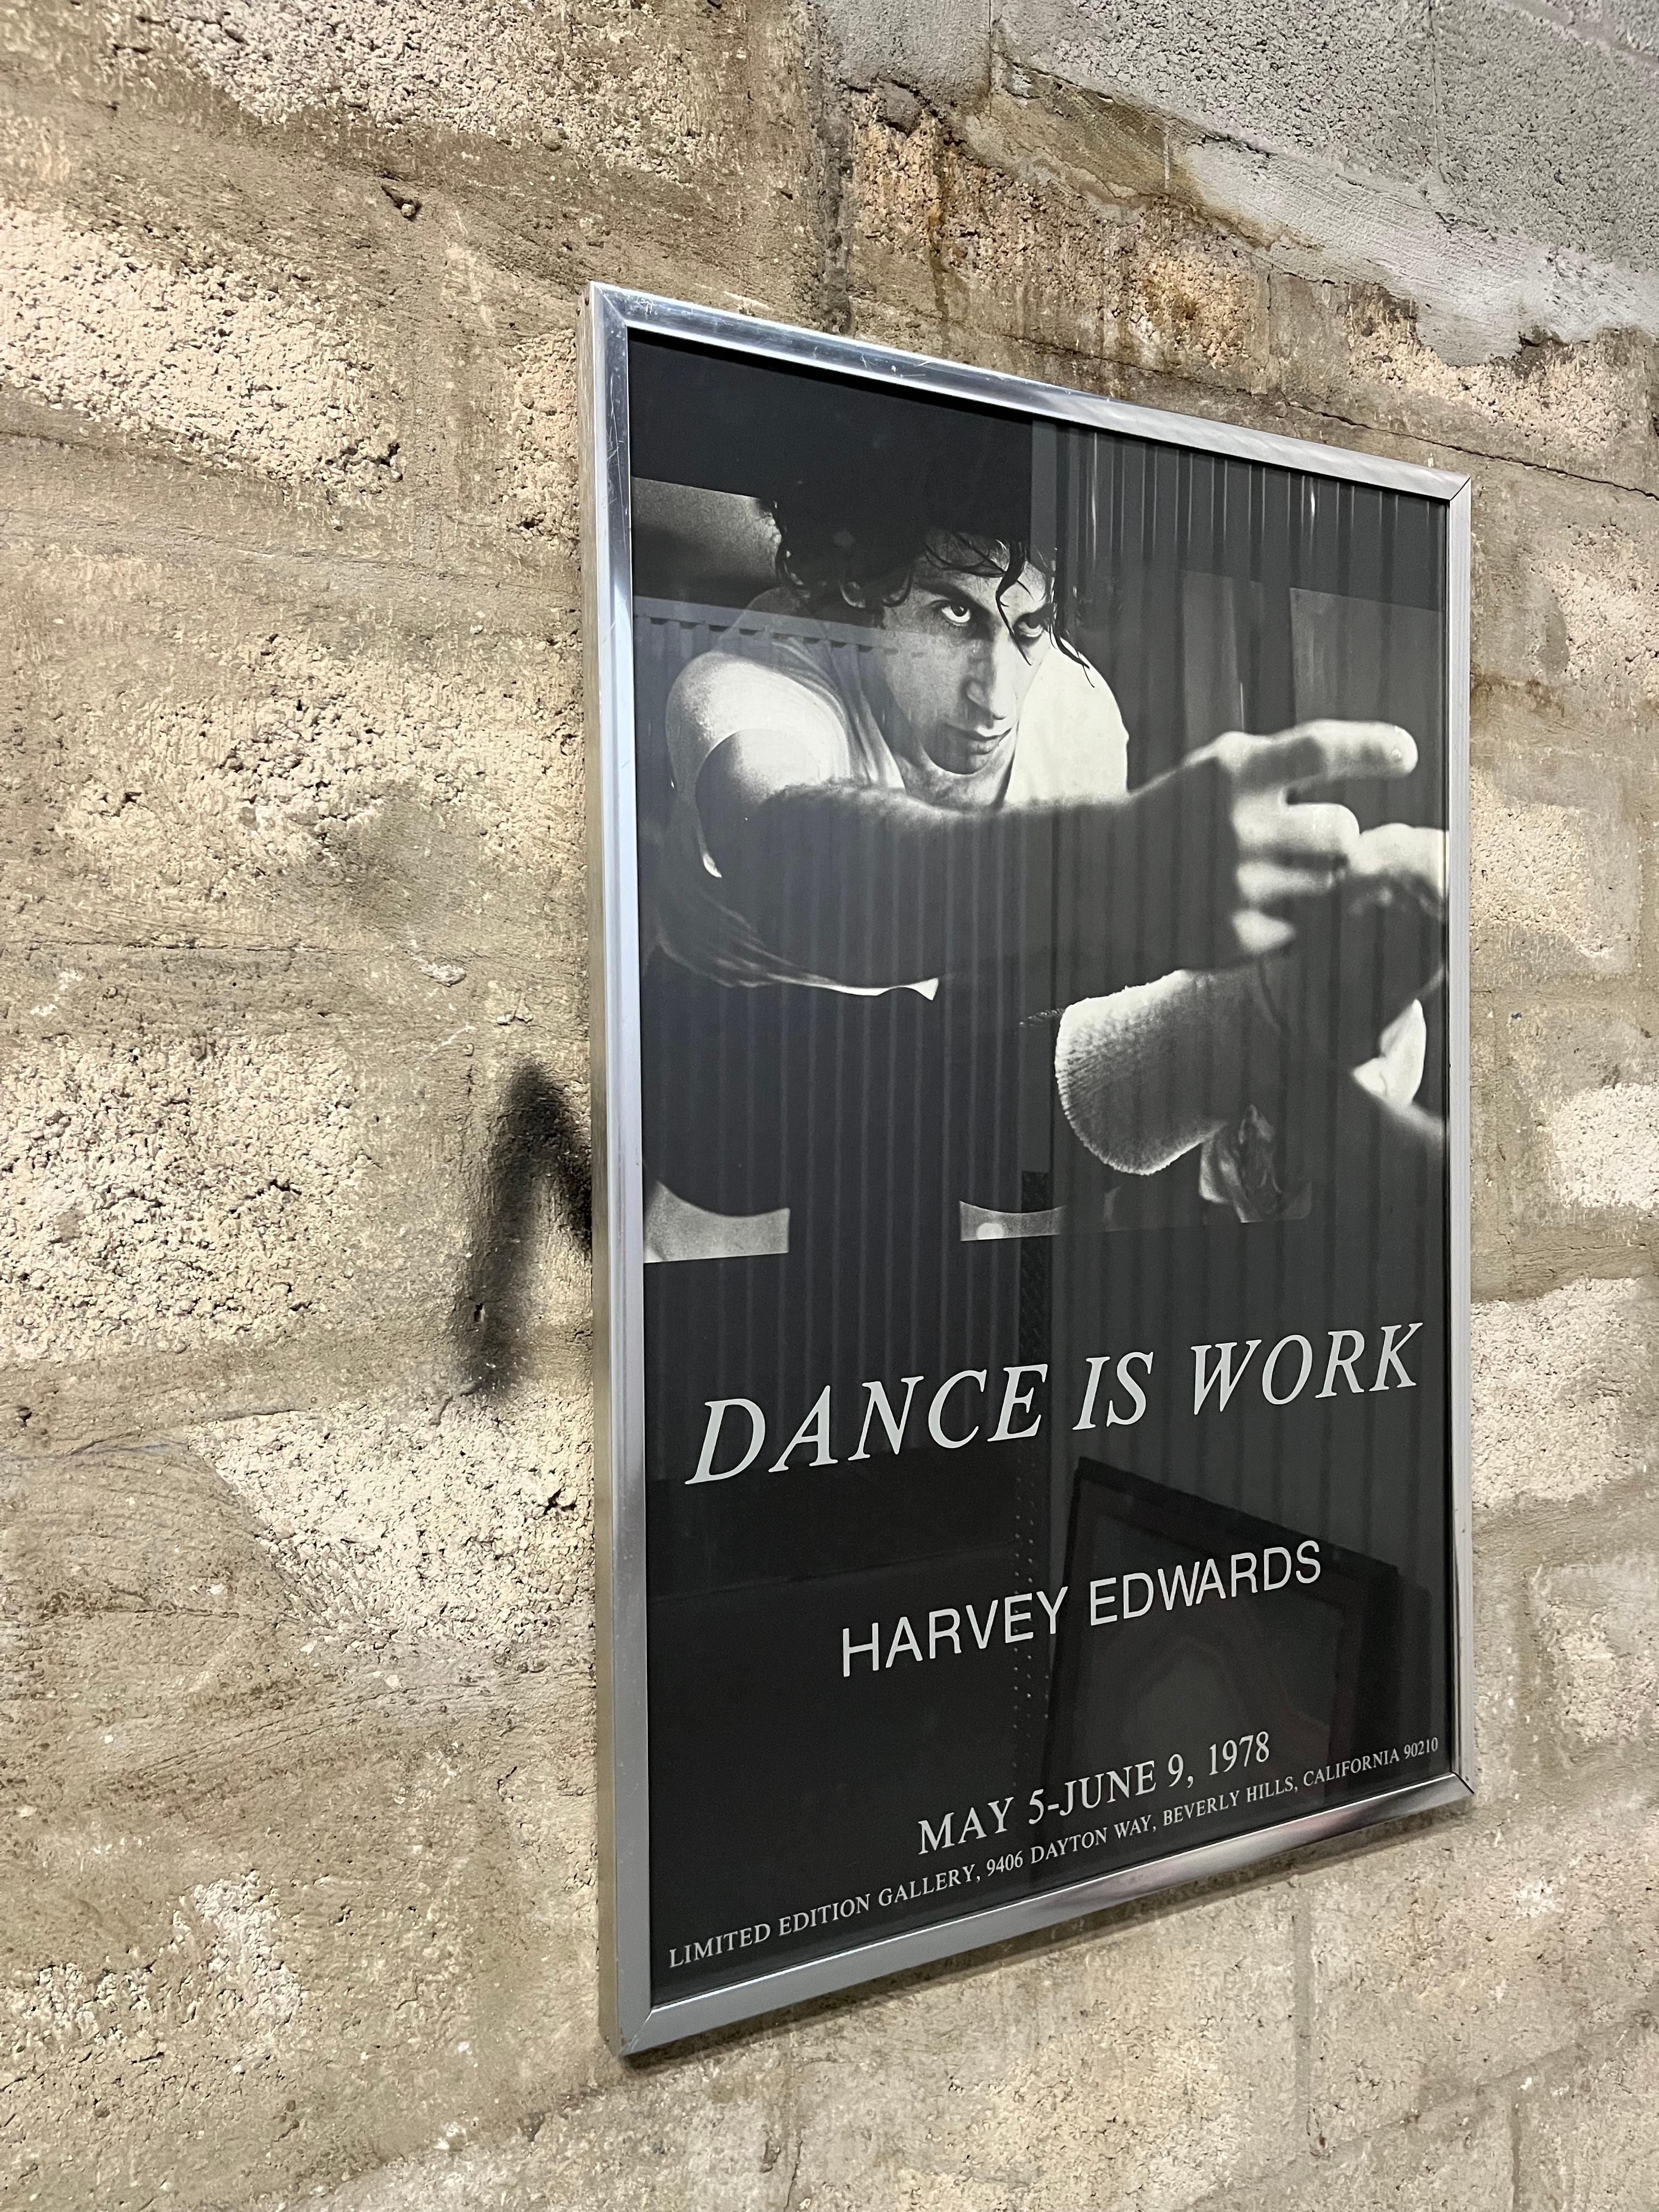 Original Harvey Edwards Black and White exhibition Poster From the 1978 Dance Is Work Exhibit at the Limited Edition Gallery in Beverly Hills, California.
Features a monochromatic image of a dancer on a solid black background framed with an aluminum